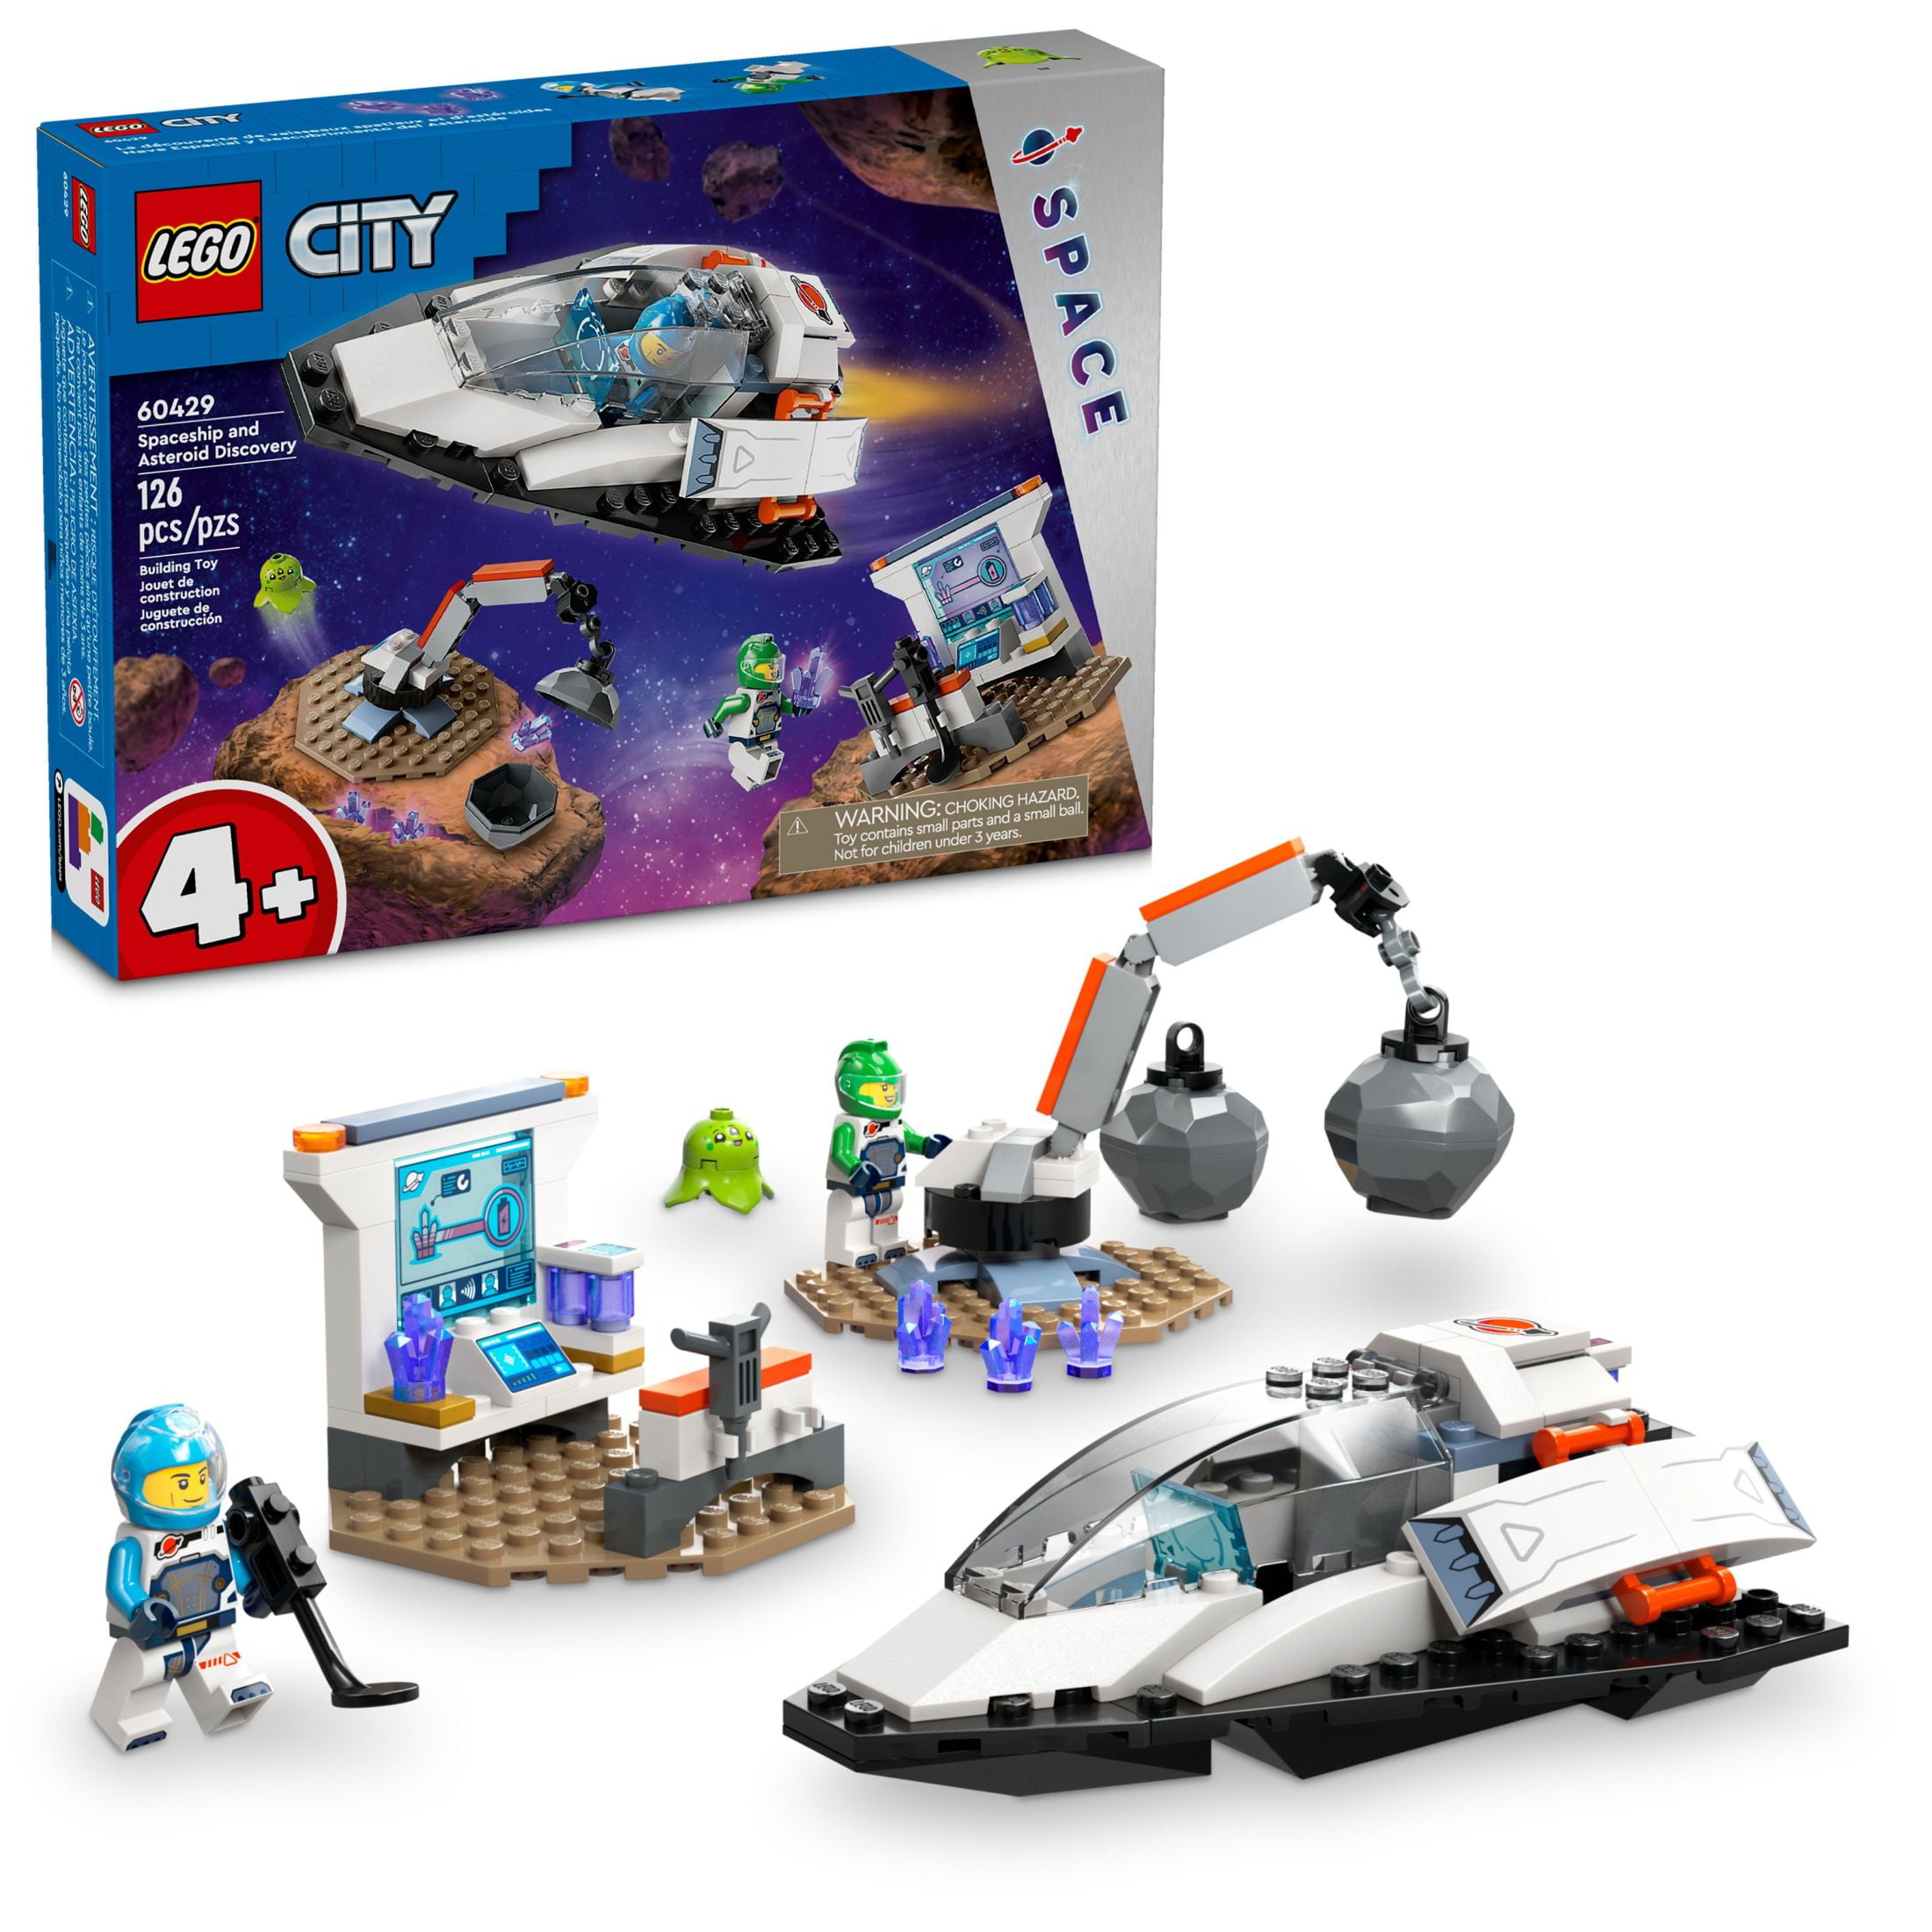 LEGO City Spaceship and Asteroid Discovery Toy Building Set, Gift